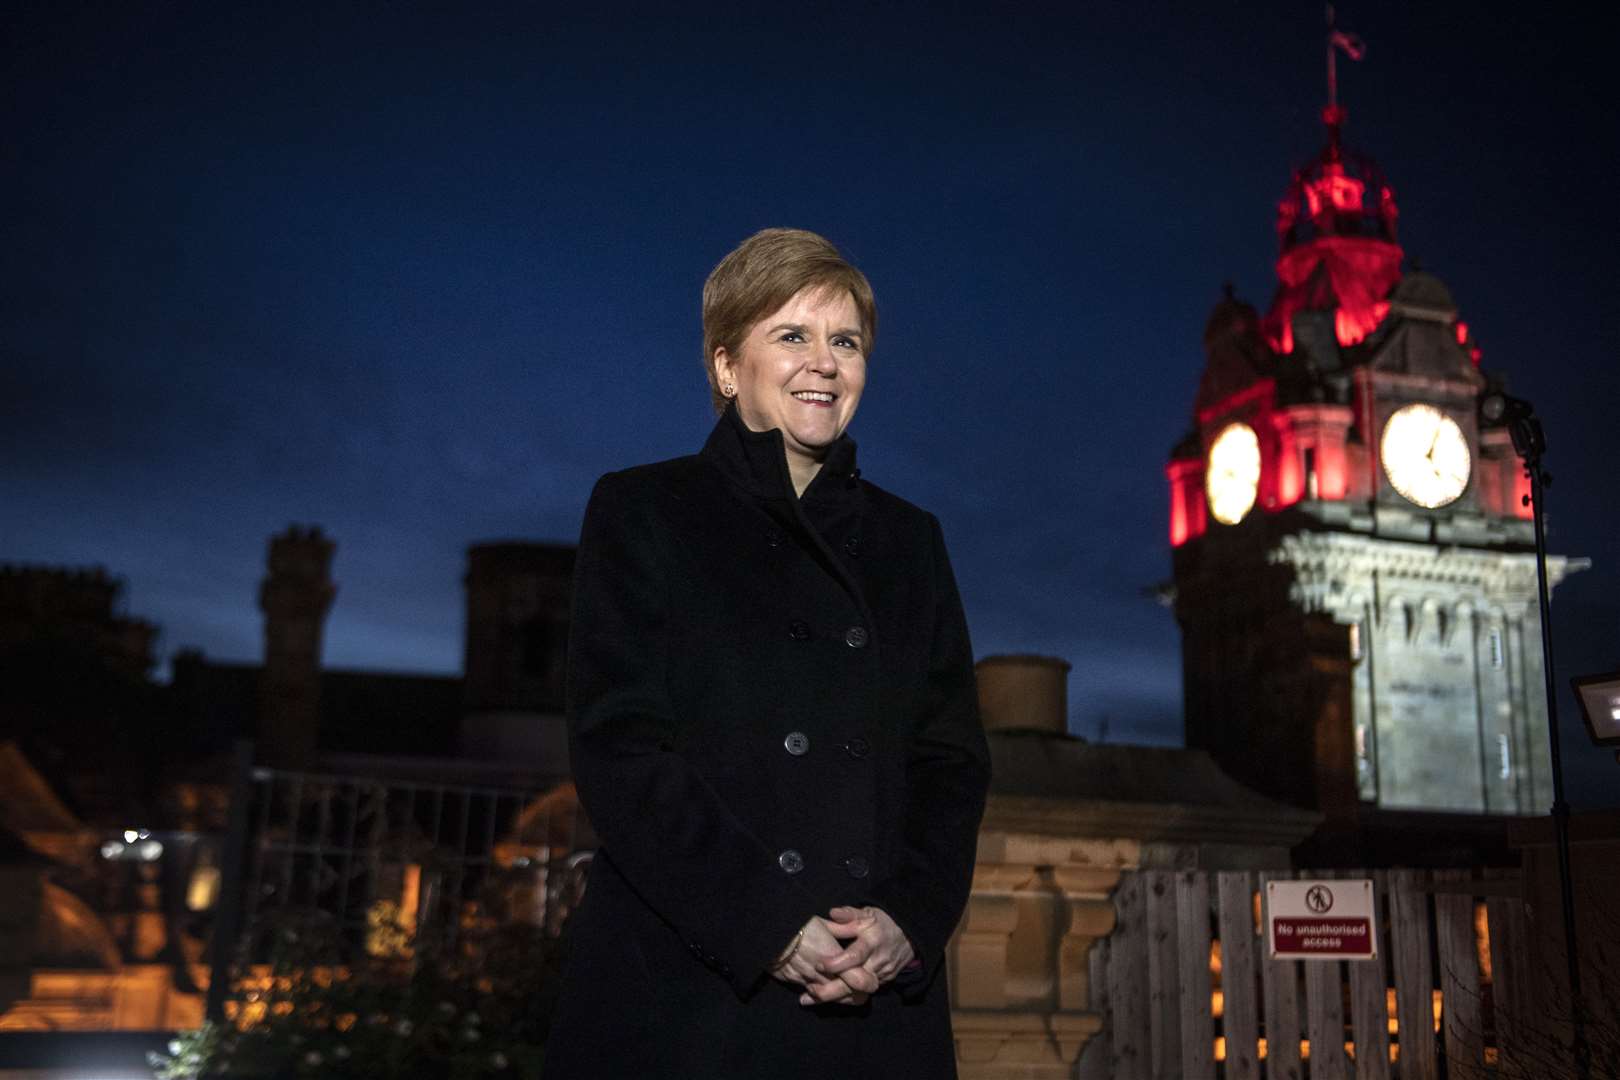 Scotland’s First Minister Nicola Sturgeon has said some households may be able to form slightly larger bubbles with each other for a short period over Christmas (Andy Buchanan/PA)